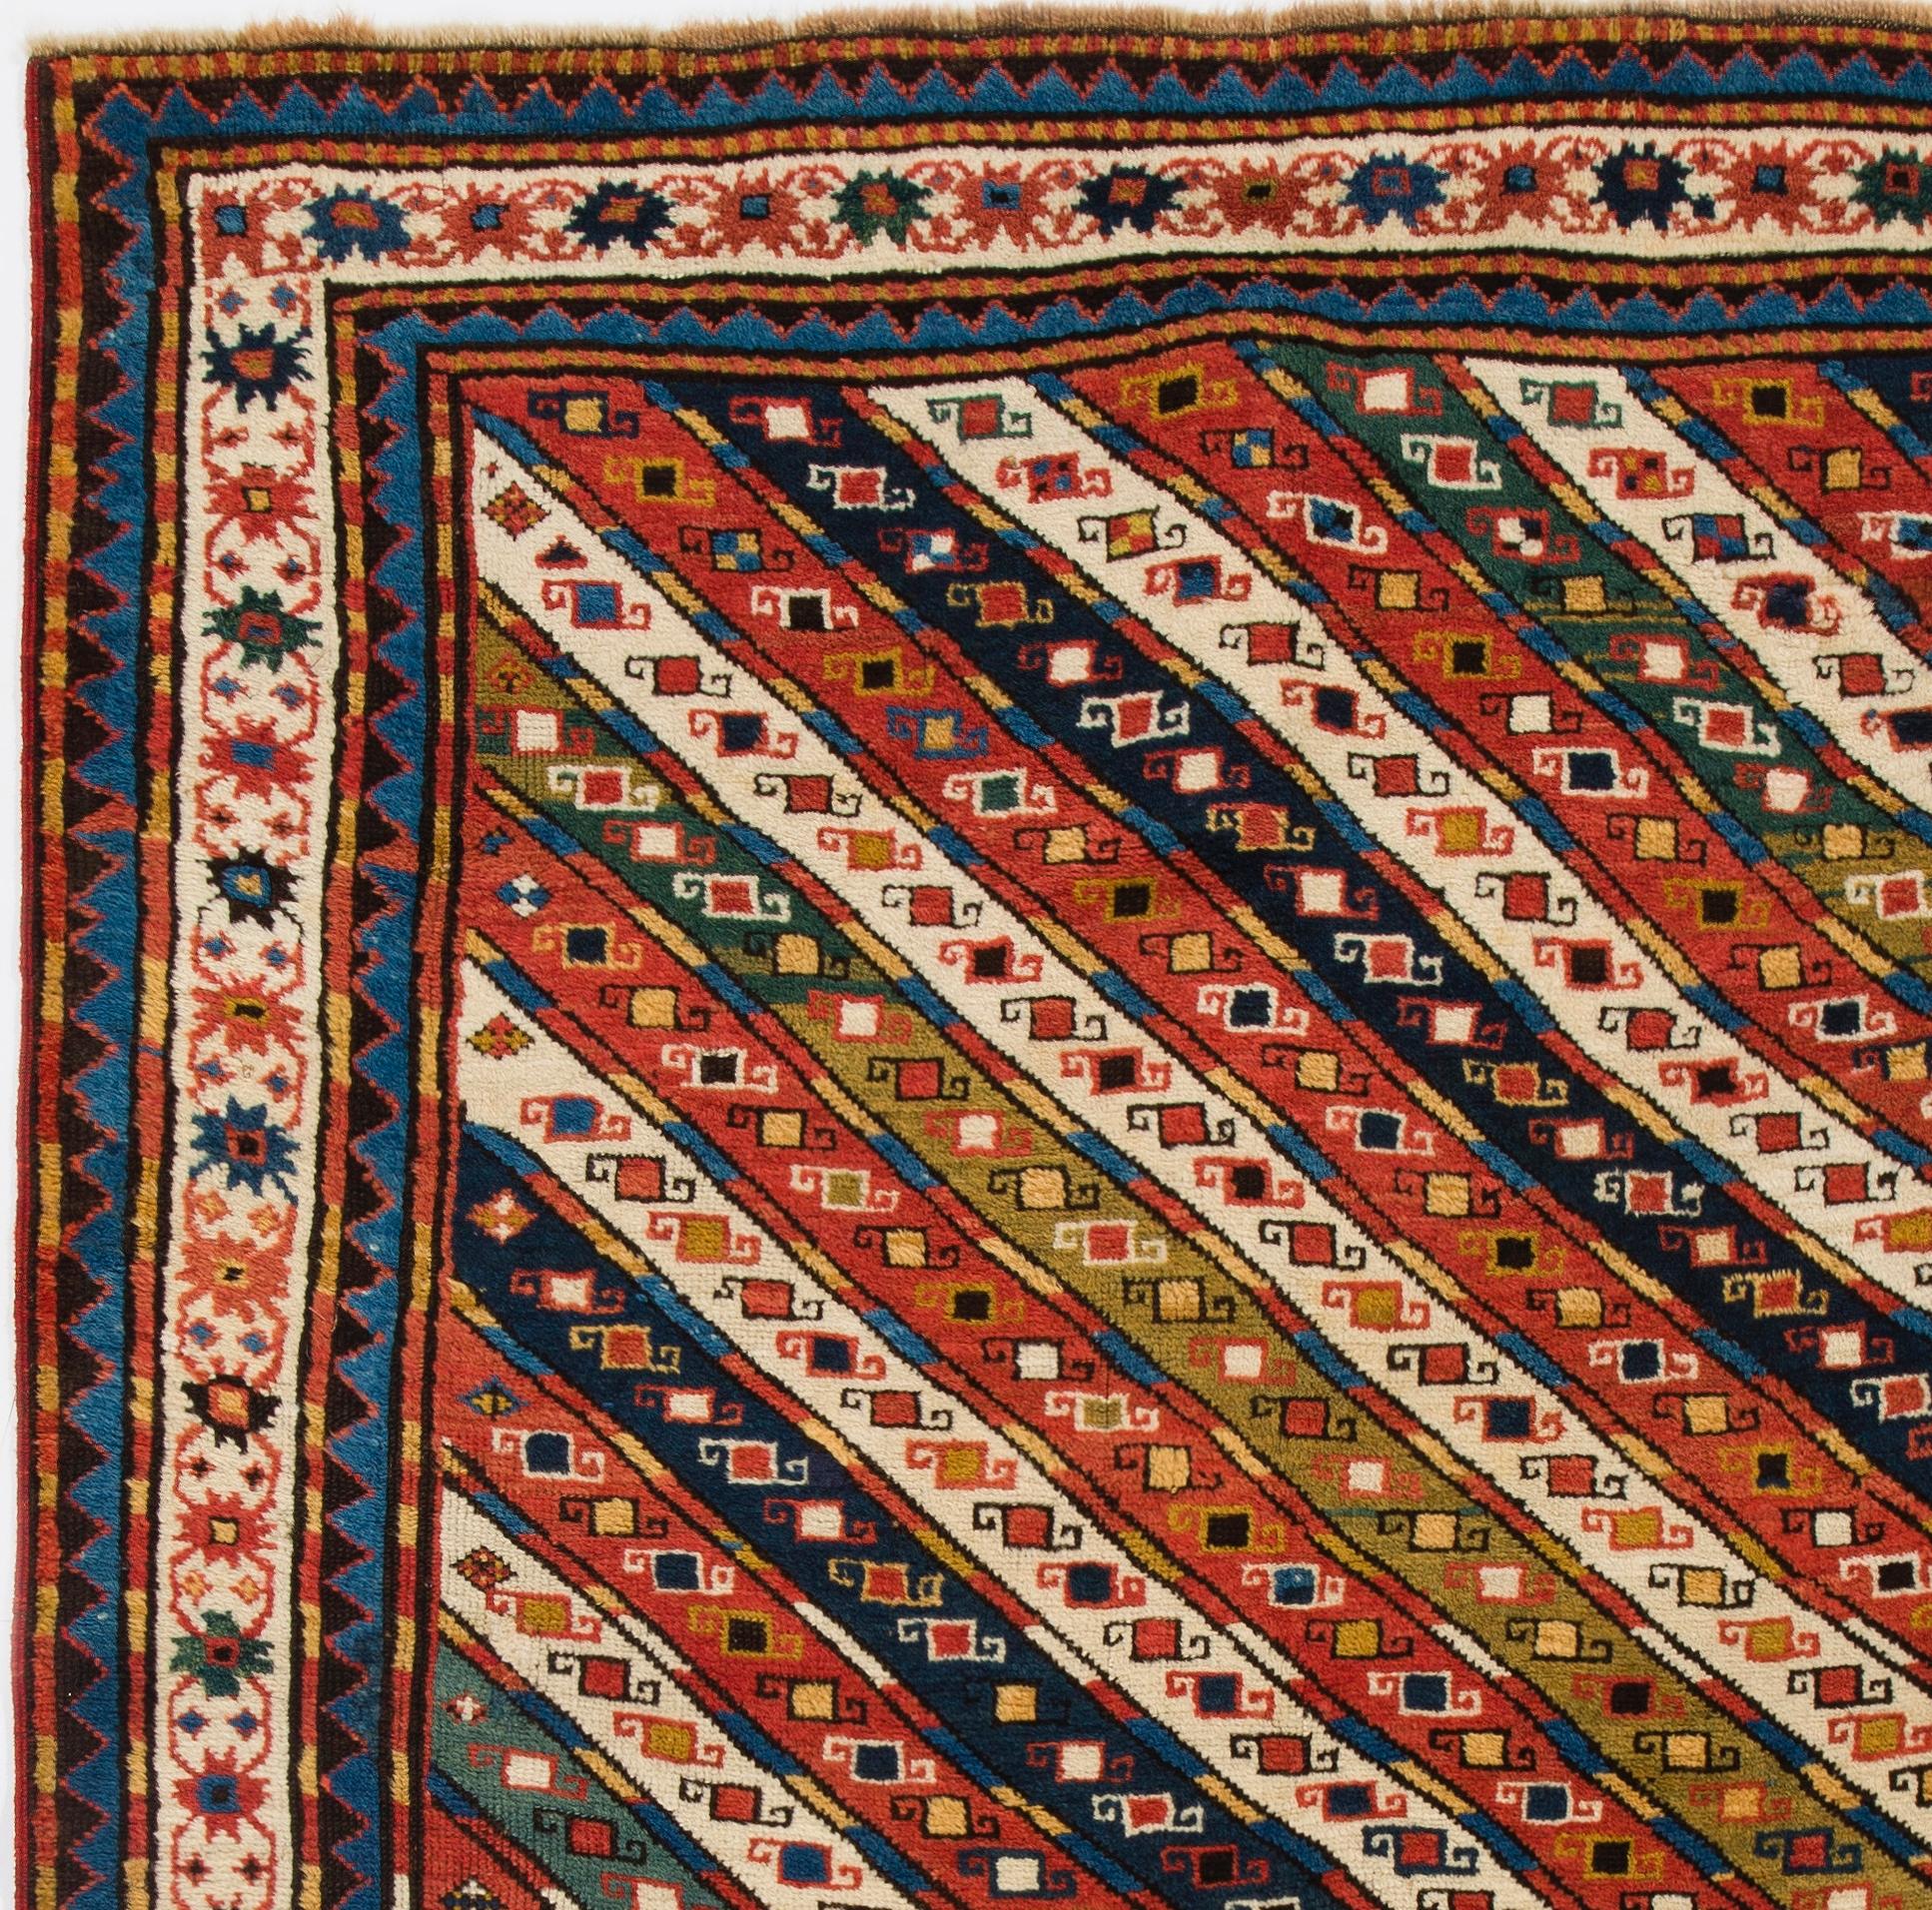 Antique Caucasian Karabagh rug.
Finely hand-knotted with even medium wool pile on wool foundation. Very good condition. Sturdy and as clean as a brand new rug (deep washed professionally). Size: 4'7'' x 7'2''.